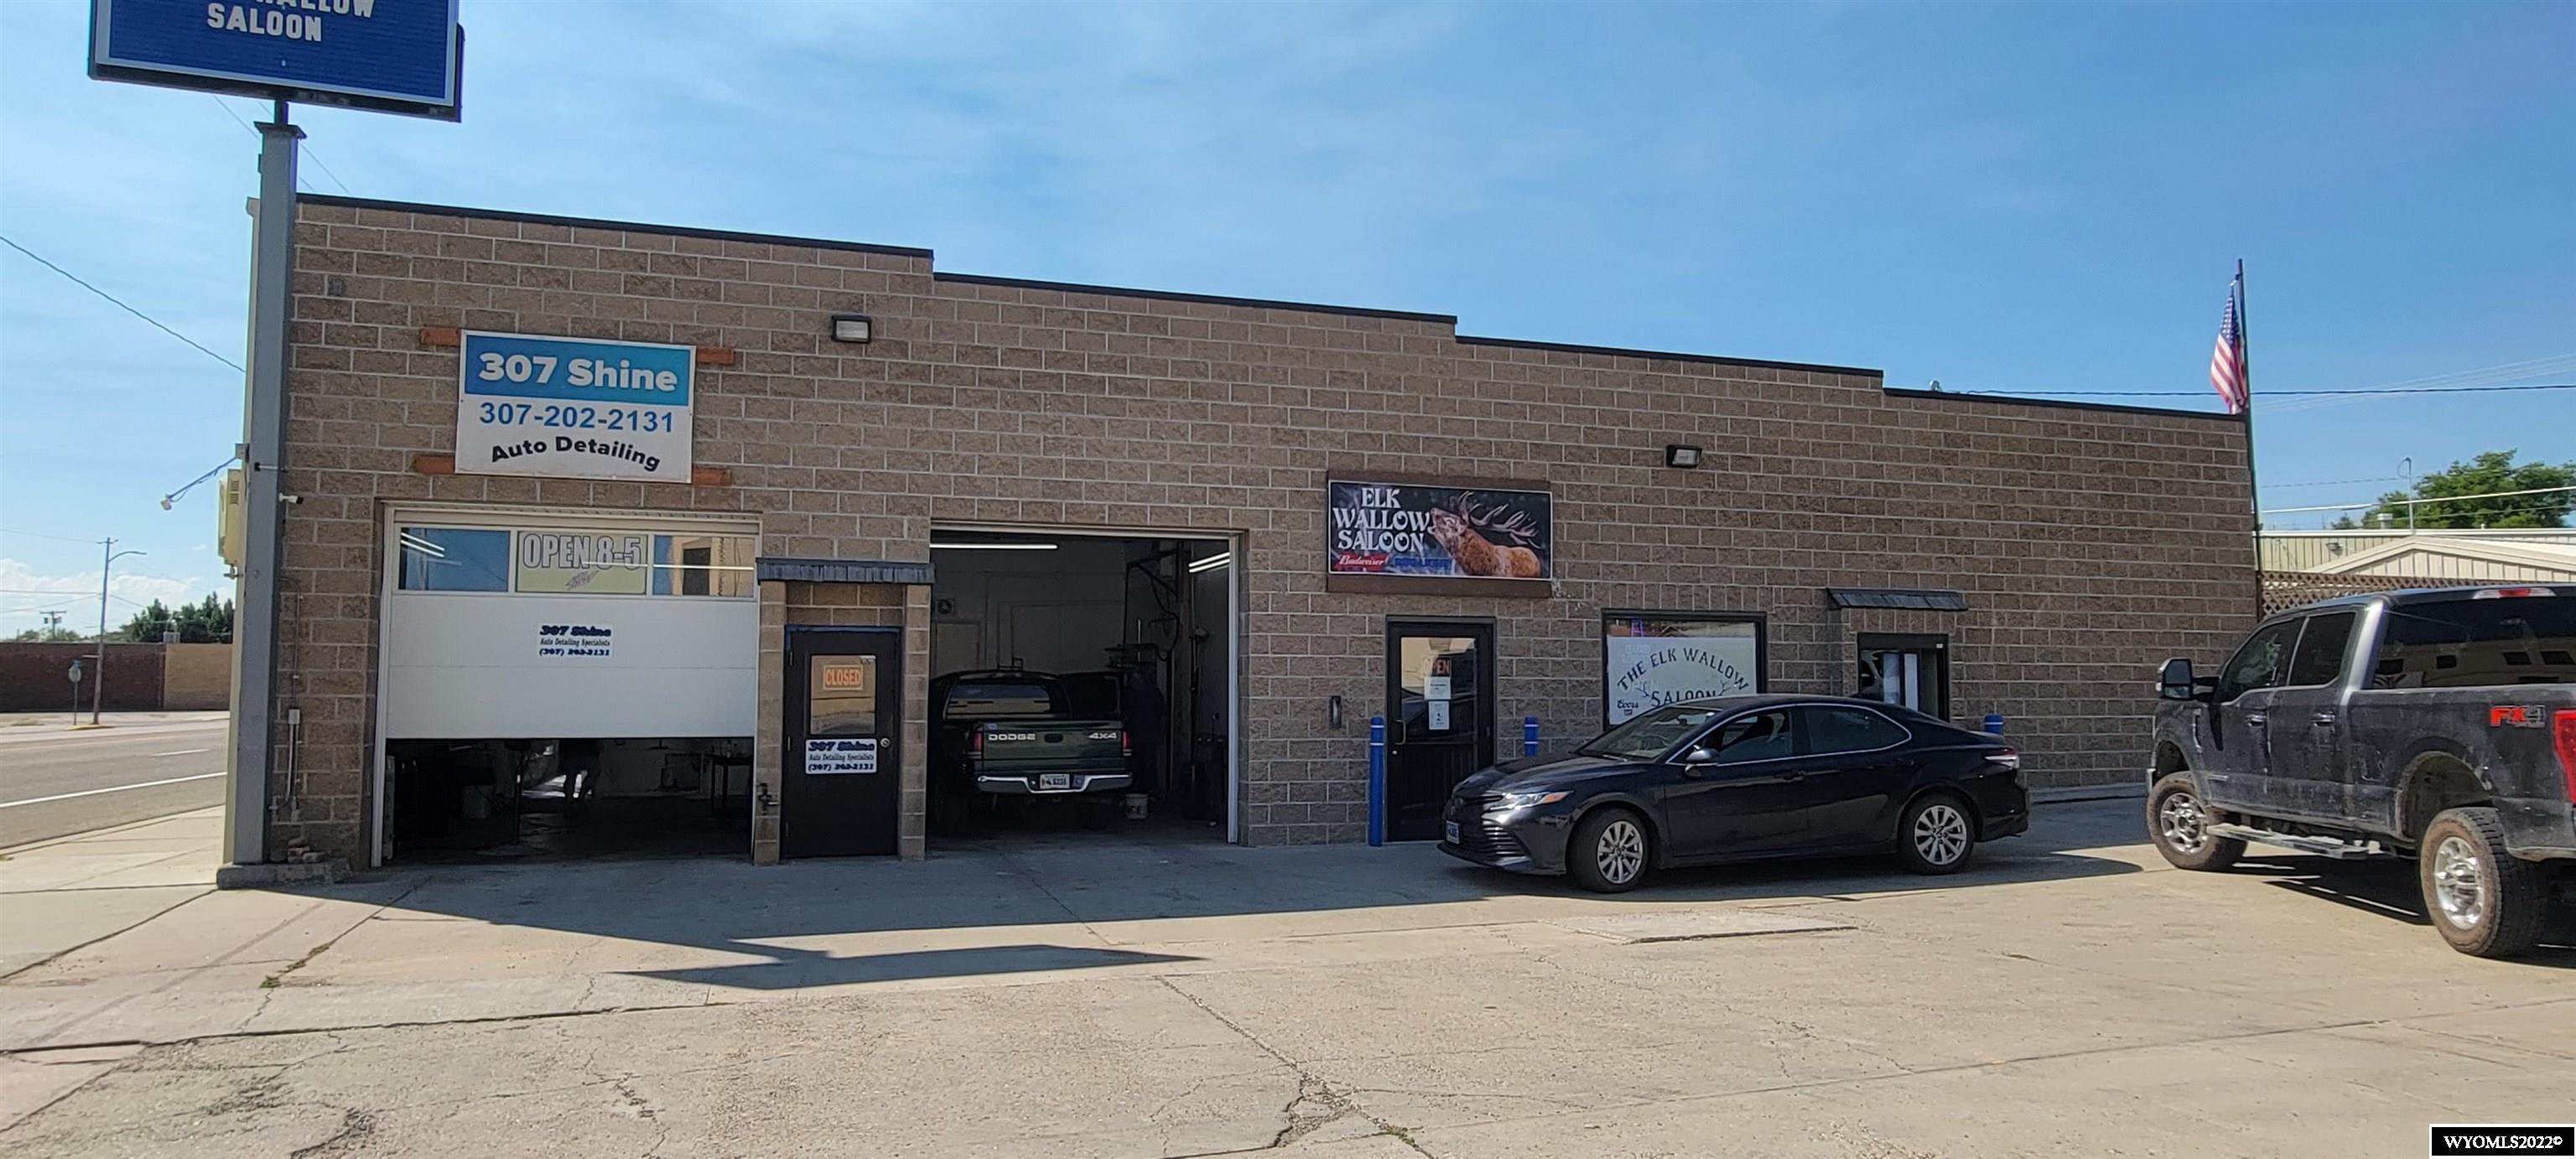 What a great business opportunity.  2 businesses plus 2 additional buildings that are currently rented or use as storage for yourself!  Full retail liquor license, drive through window, outside deck, lots of parking space.  Also included is a auto detailing business.  Possibilities are endless on this highly visible corner lot on US Highway 20